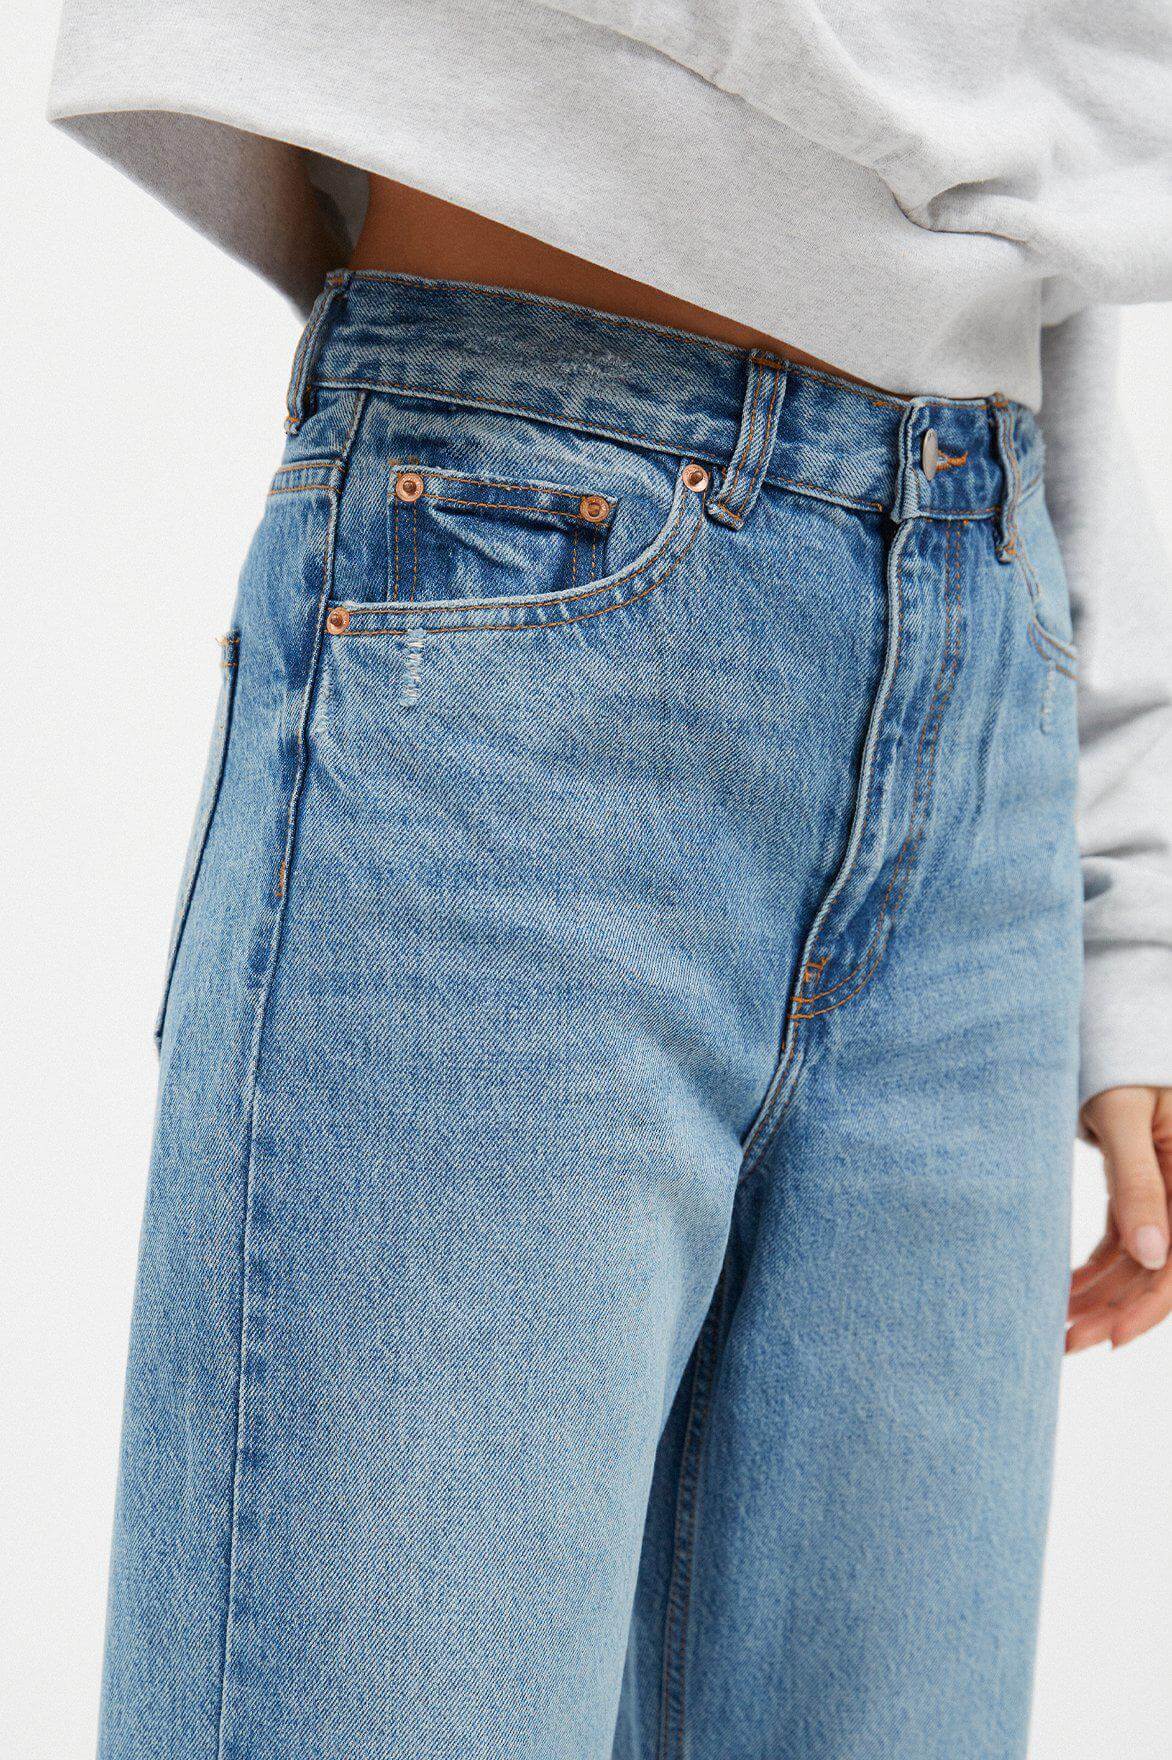 Dr. Denim Echo Jeans in Blue Jay - Close